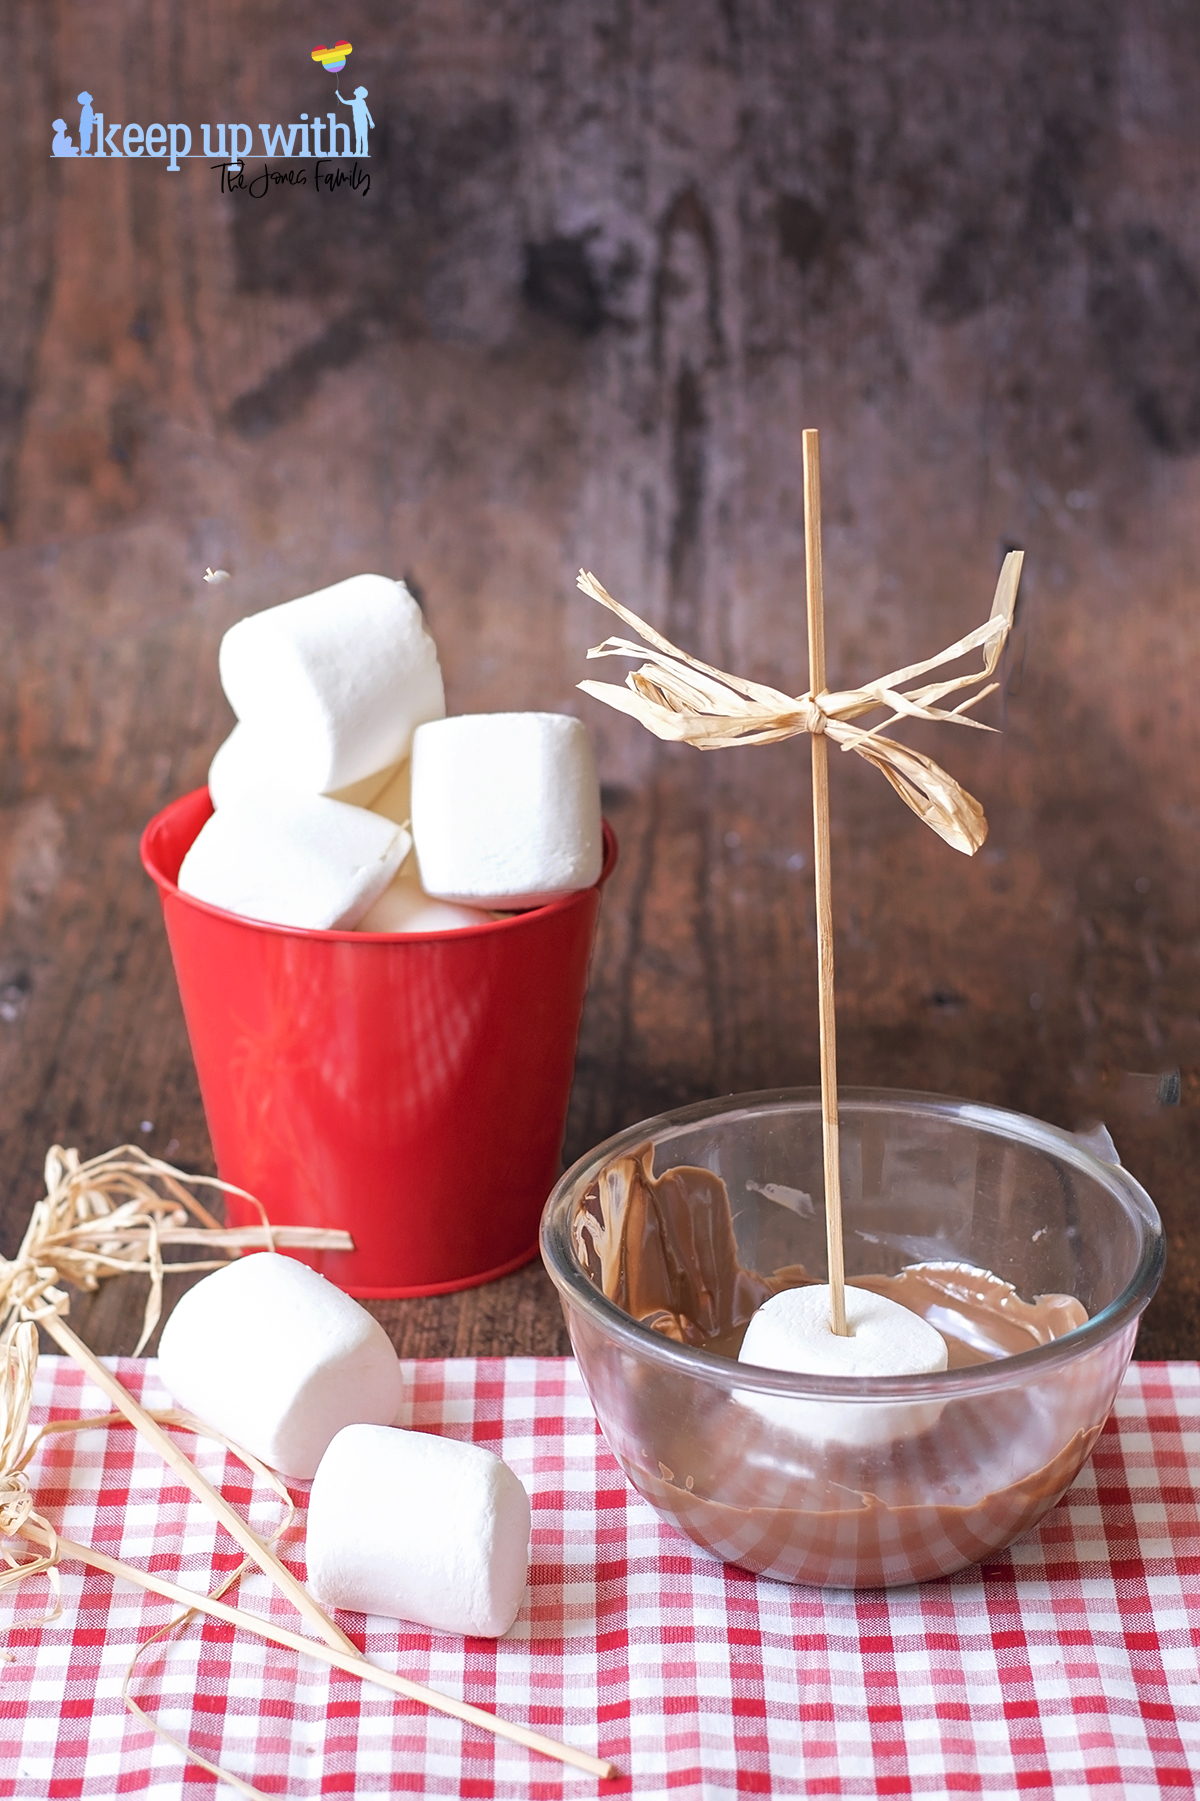 Image shows a dark wooden tabletop with a red tin bucket full with large marshmallows. In front of the bucket is a glass bowl filled with melted chocolate. Inside the bowl sits a large marshmallow on a stick being coated in chocolate to make Teddy Bear S'More Pops. Image by keep up with the jones family.